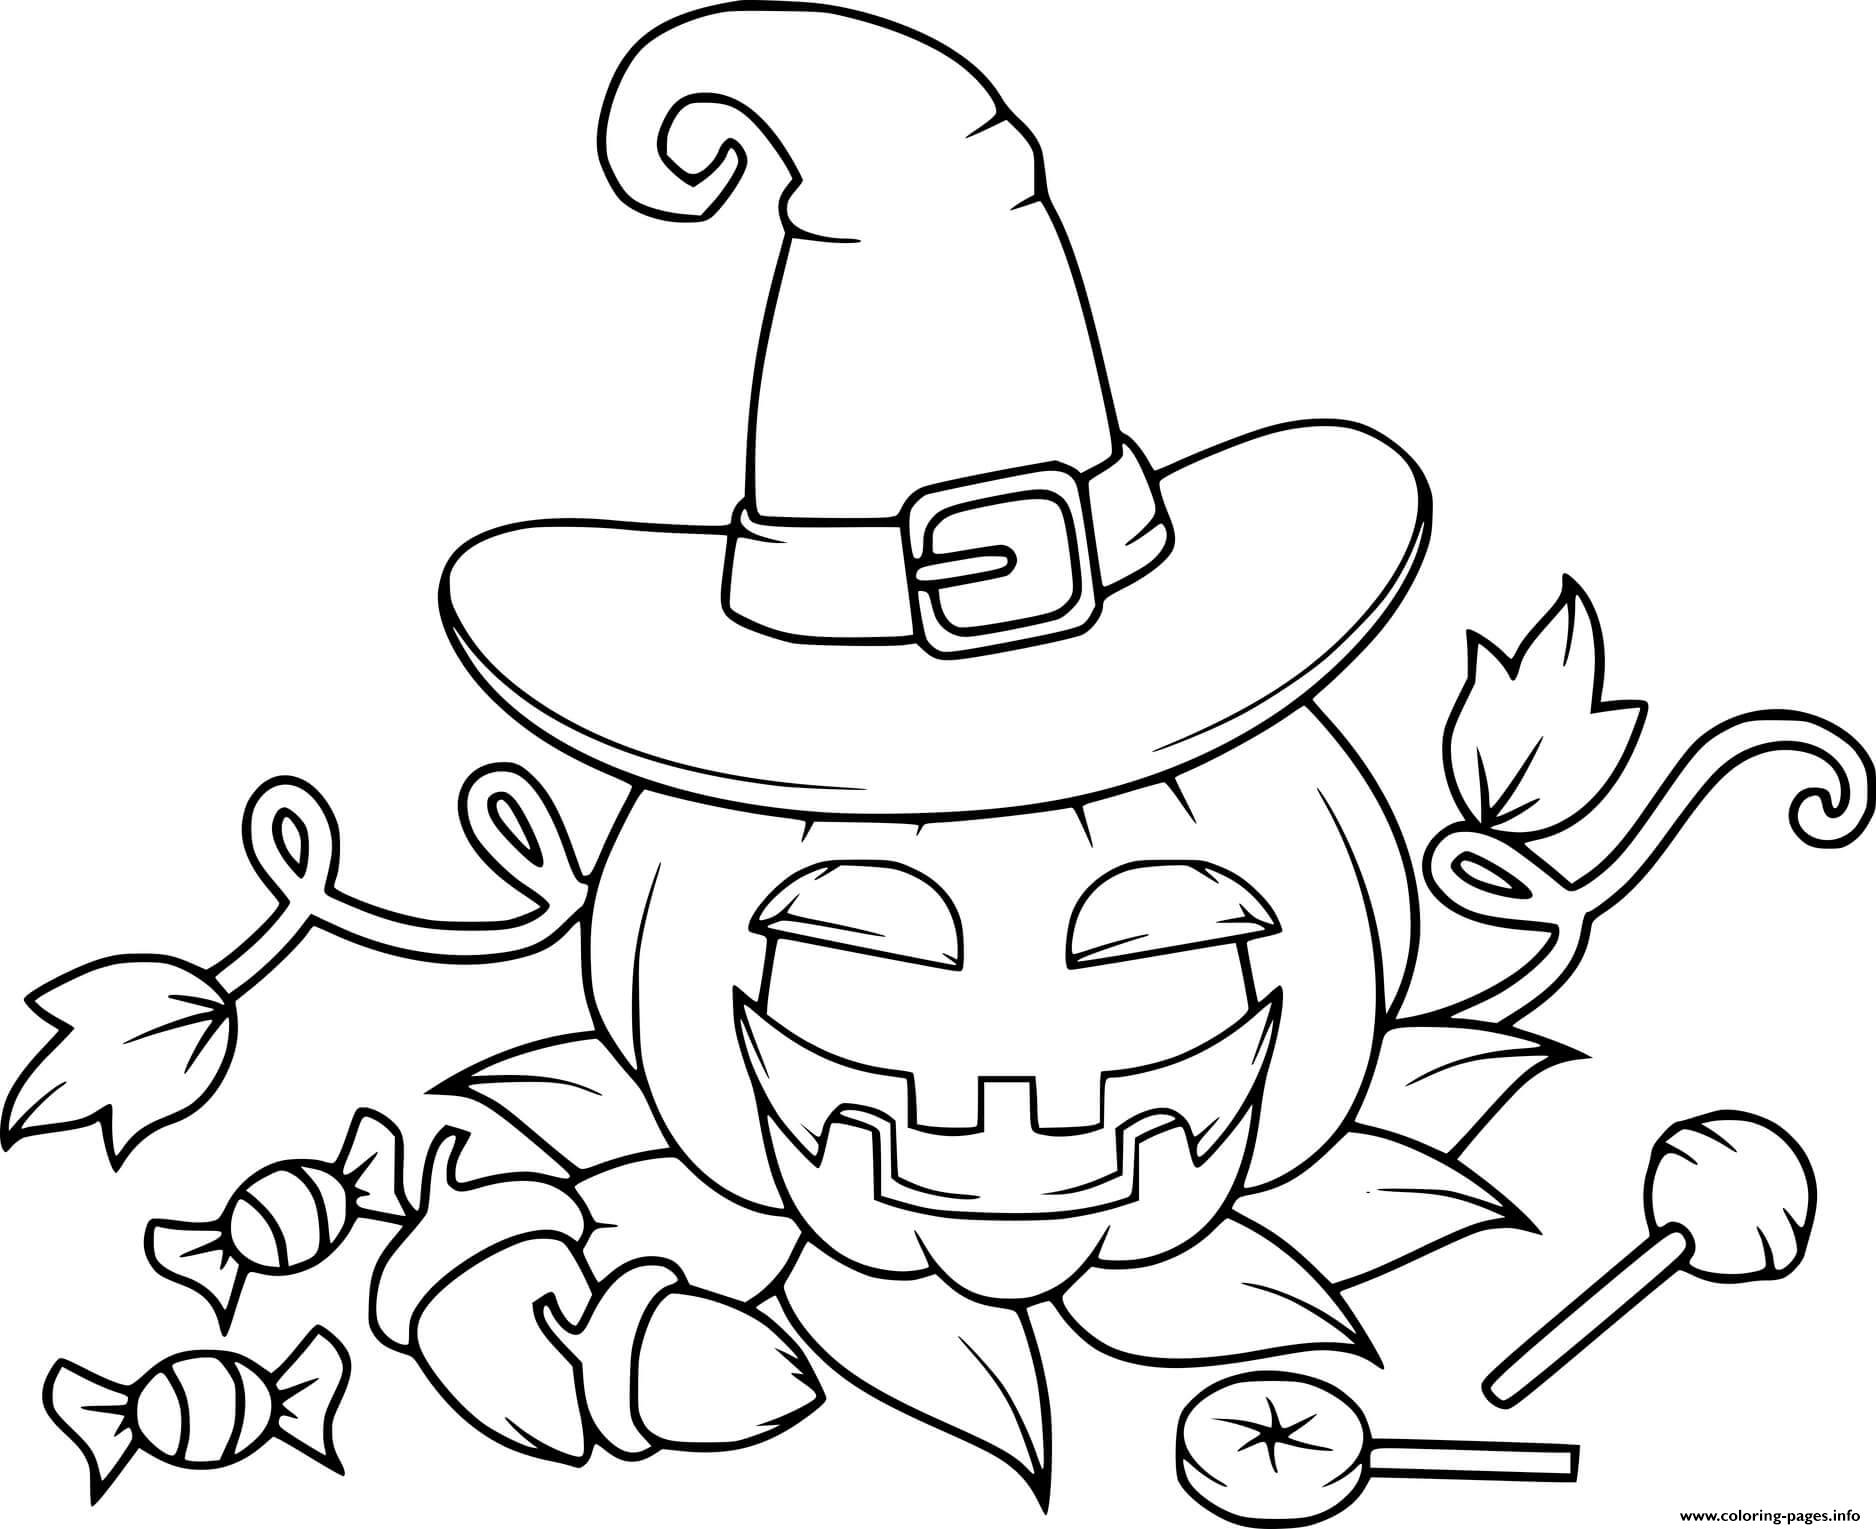 Jack O Lantern Witch With Candies coloring